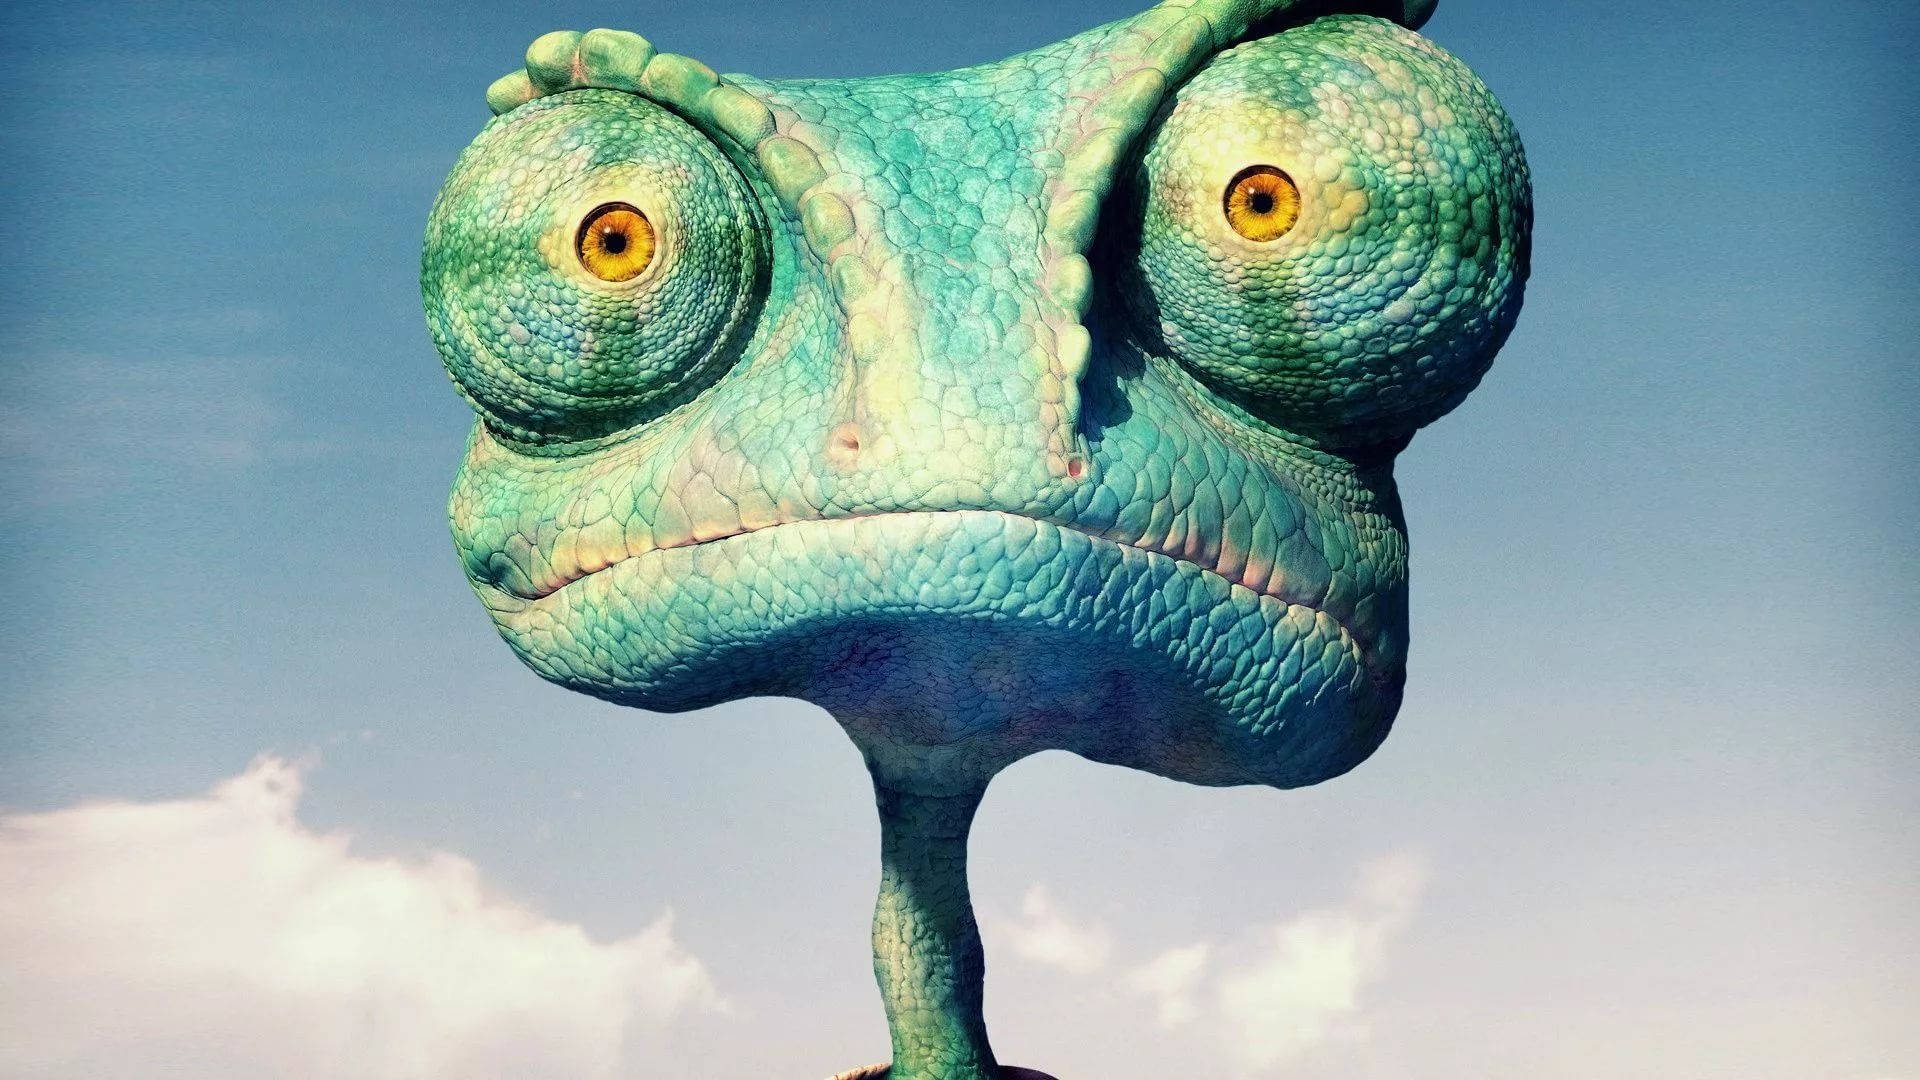 Why Did Rango Cross The Road? Background